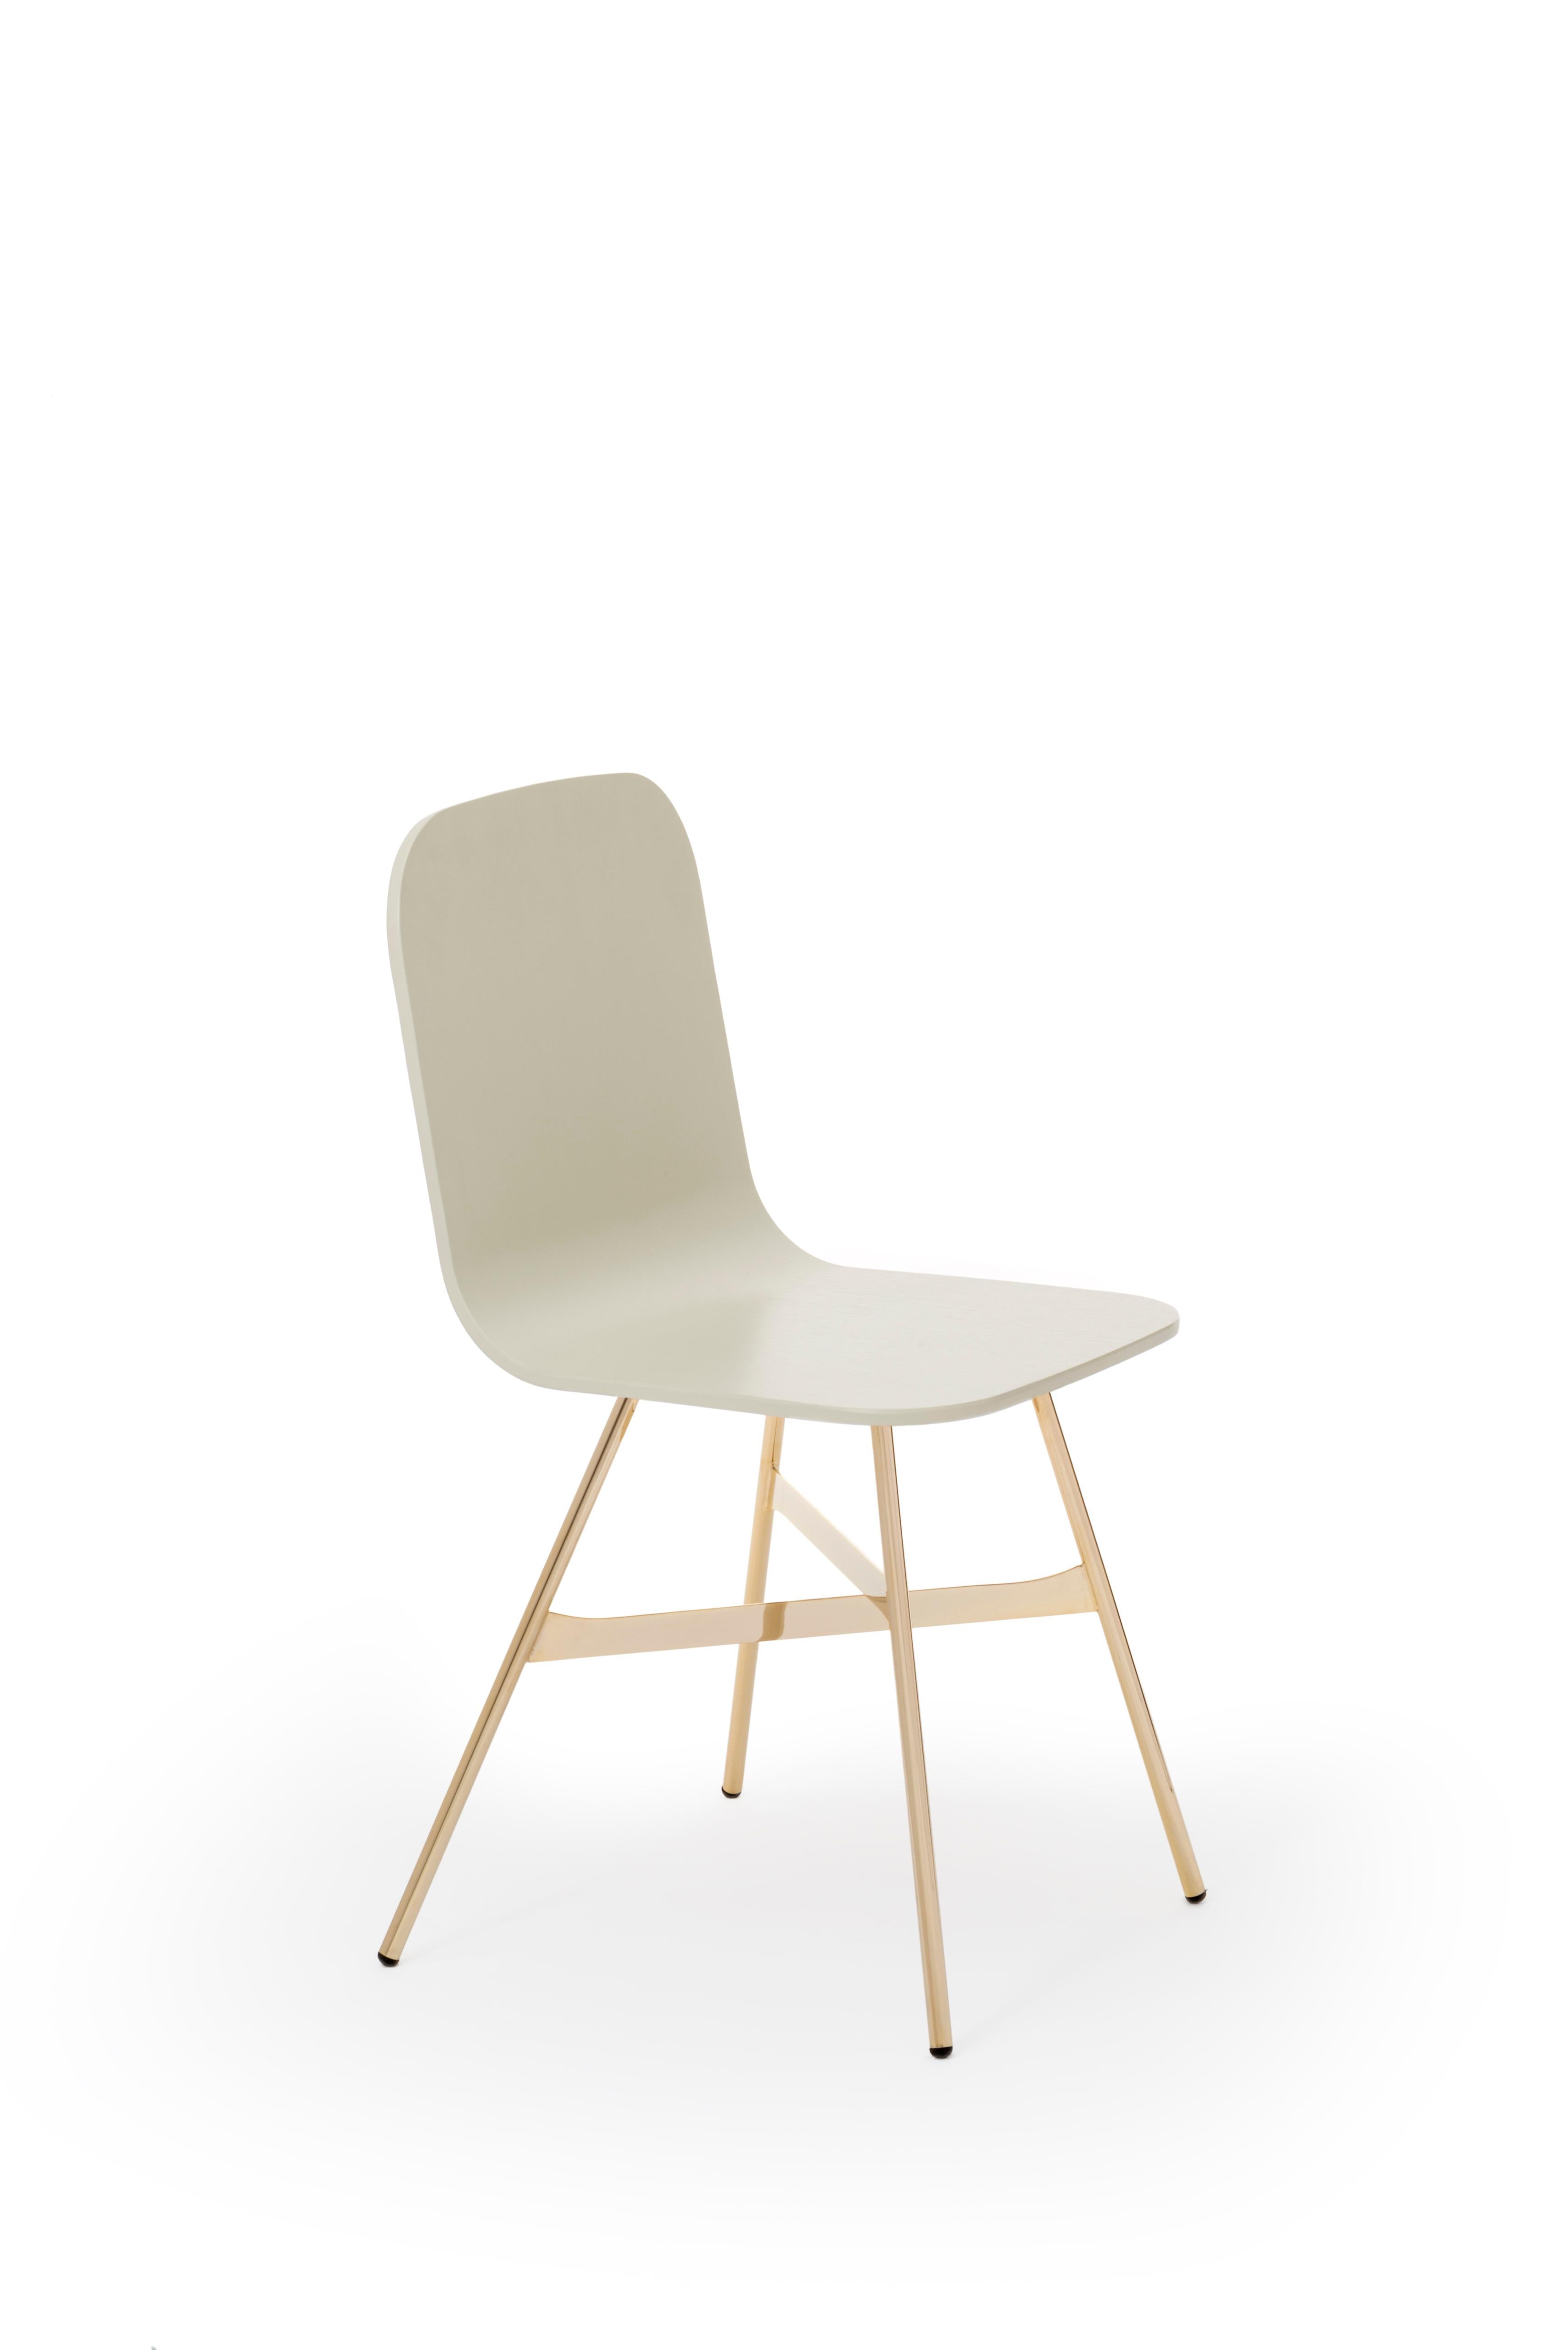 Tria Simple Chair Golden Legs Upholstered in Mint Green Velvet Made in Italy For Sale 6